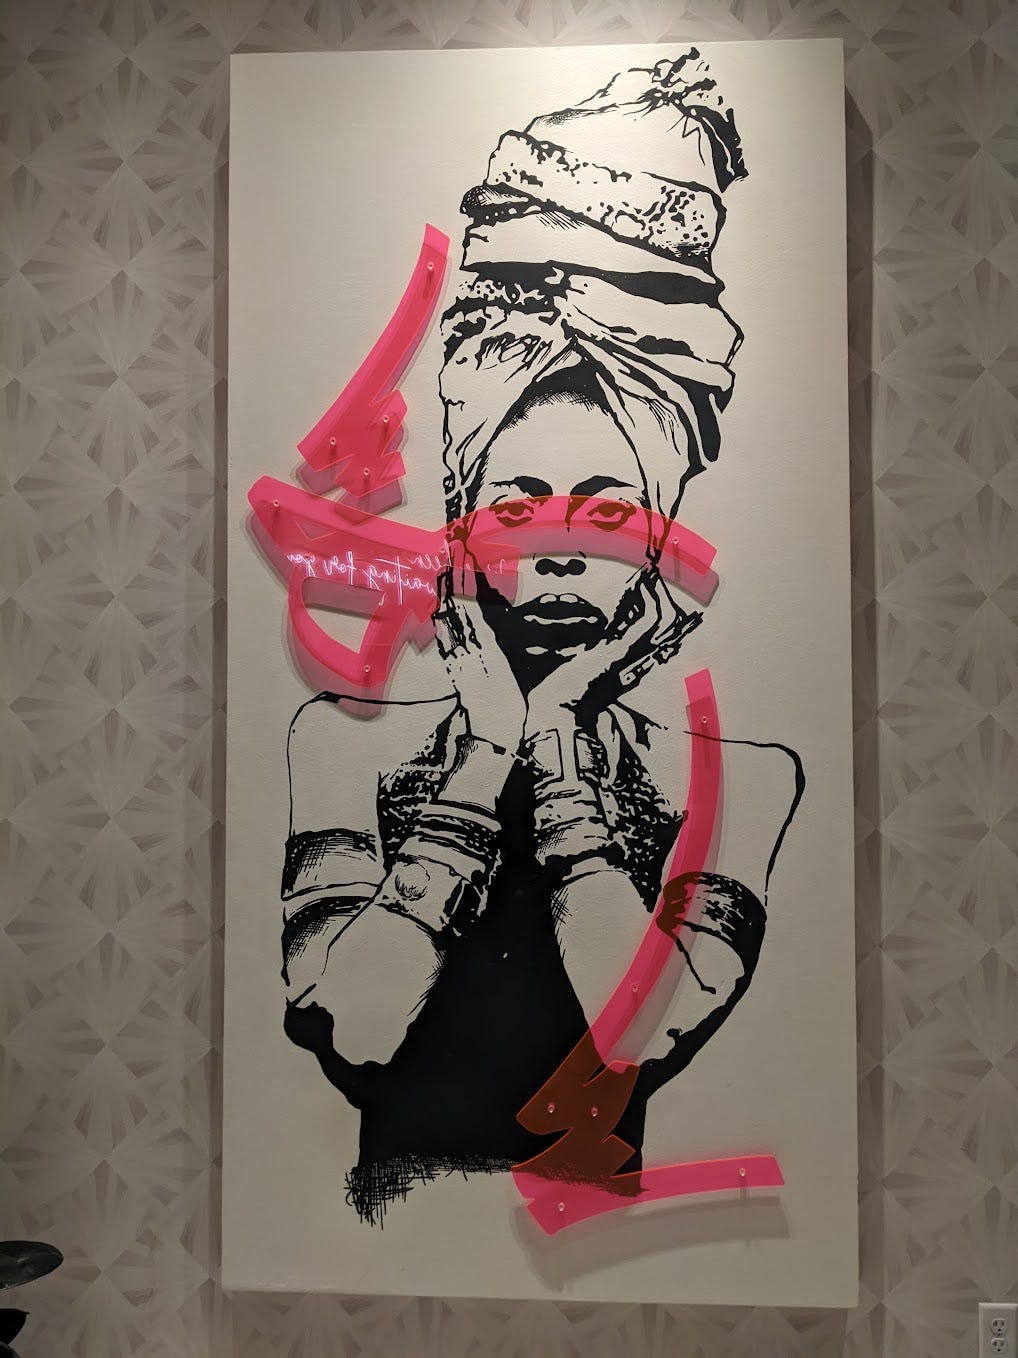 black and white print of erykah badu, on wall, with bright pink abstract painted squiggle. erykah has her head wrap on and her hands cupping her face.